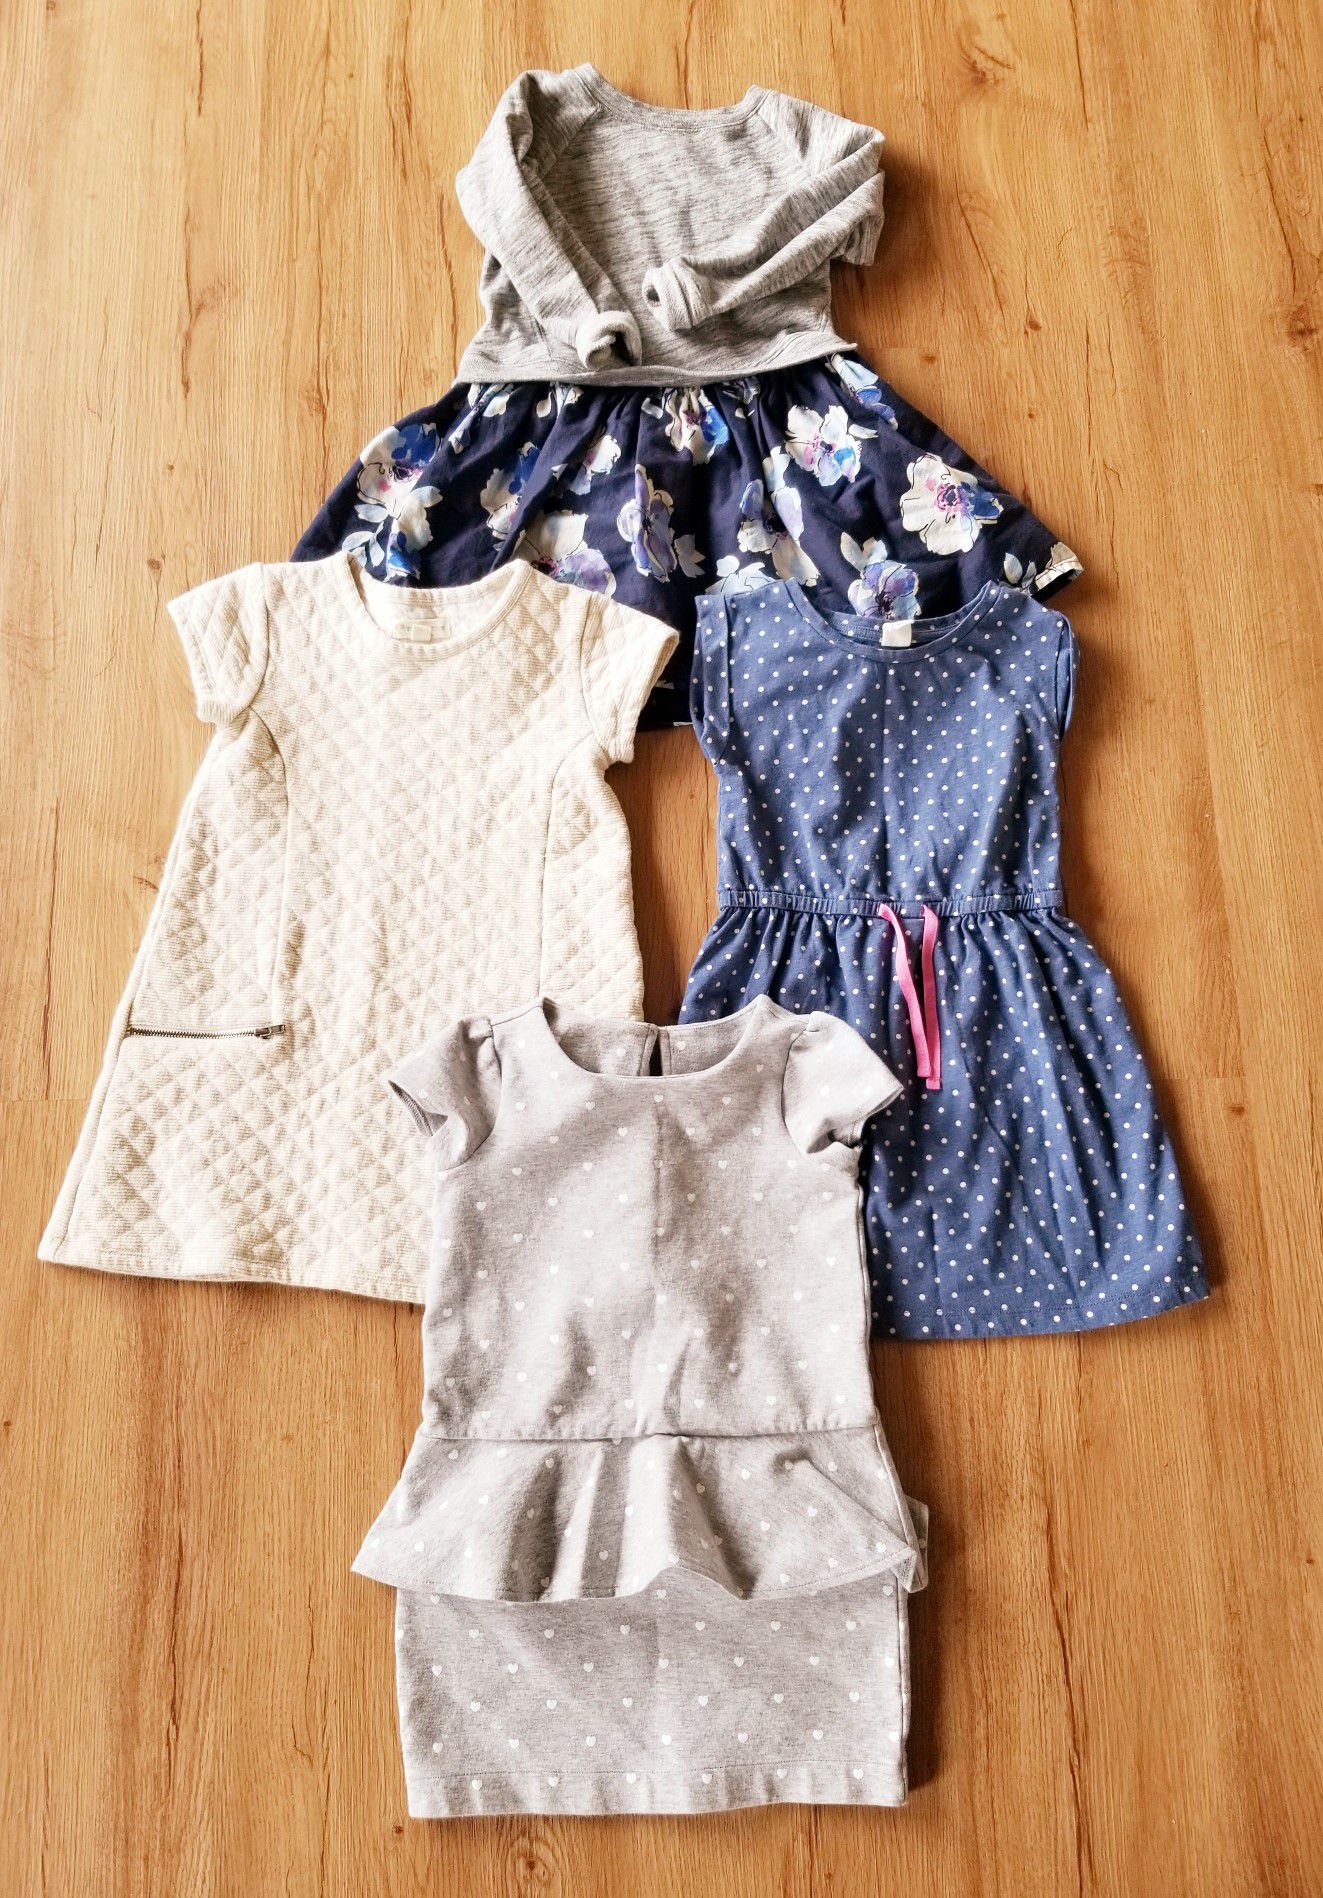 Name Brand Clothing: 12 items for size 4T-5T